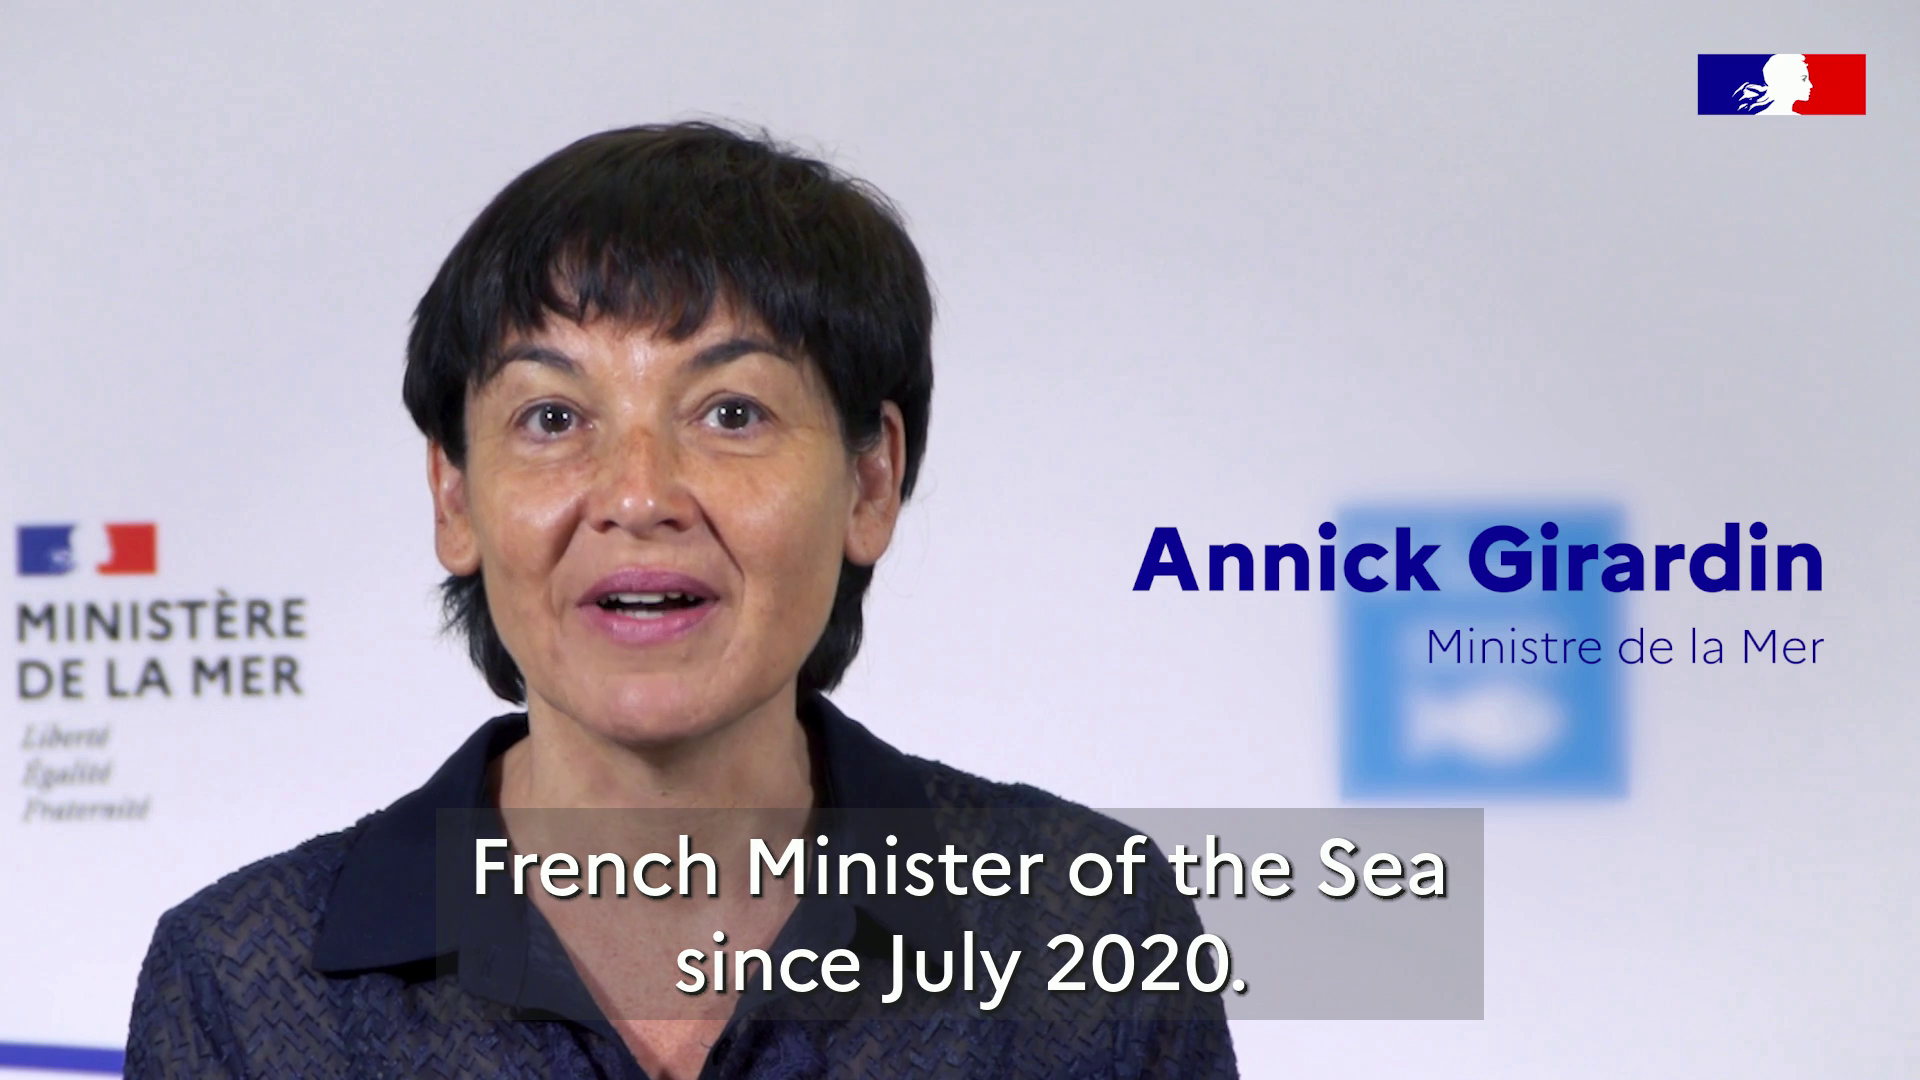 Testimony of Annick Girardin, French Minister for the Sea